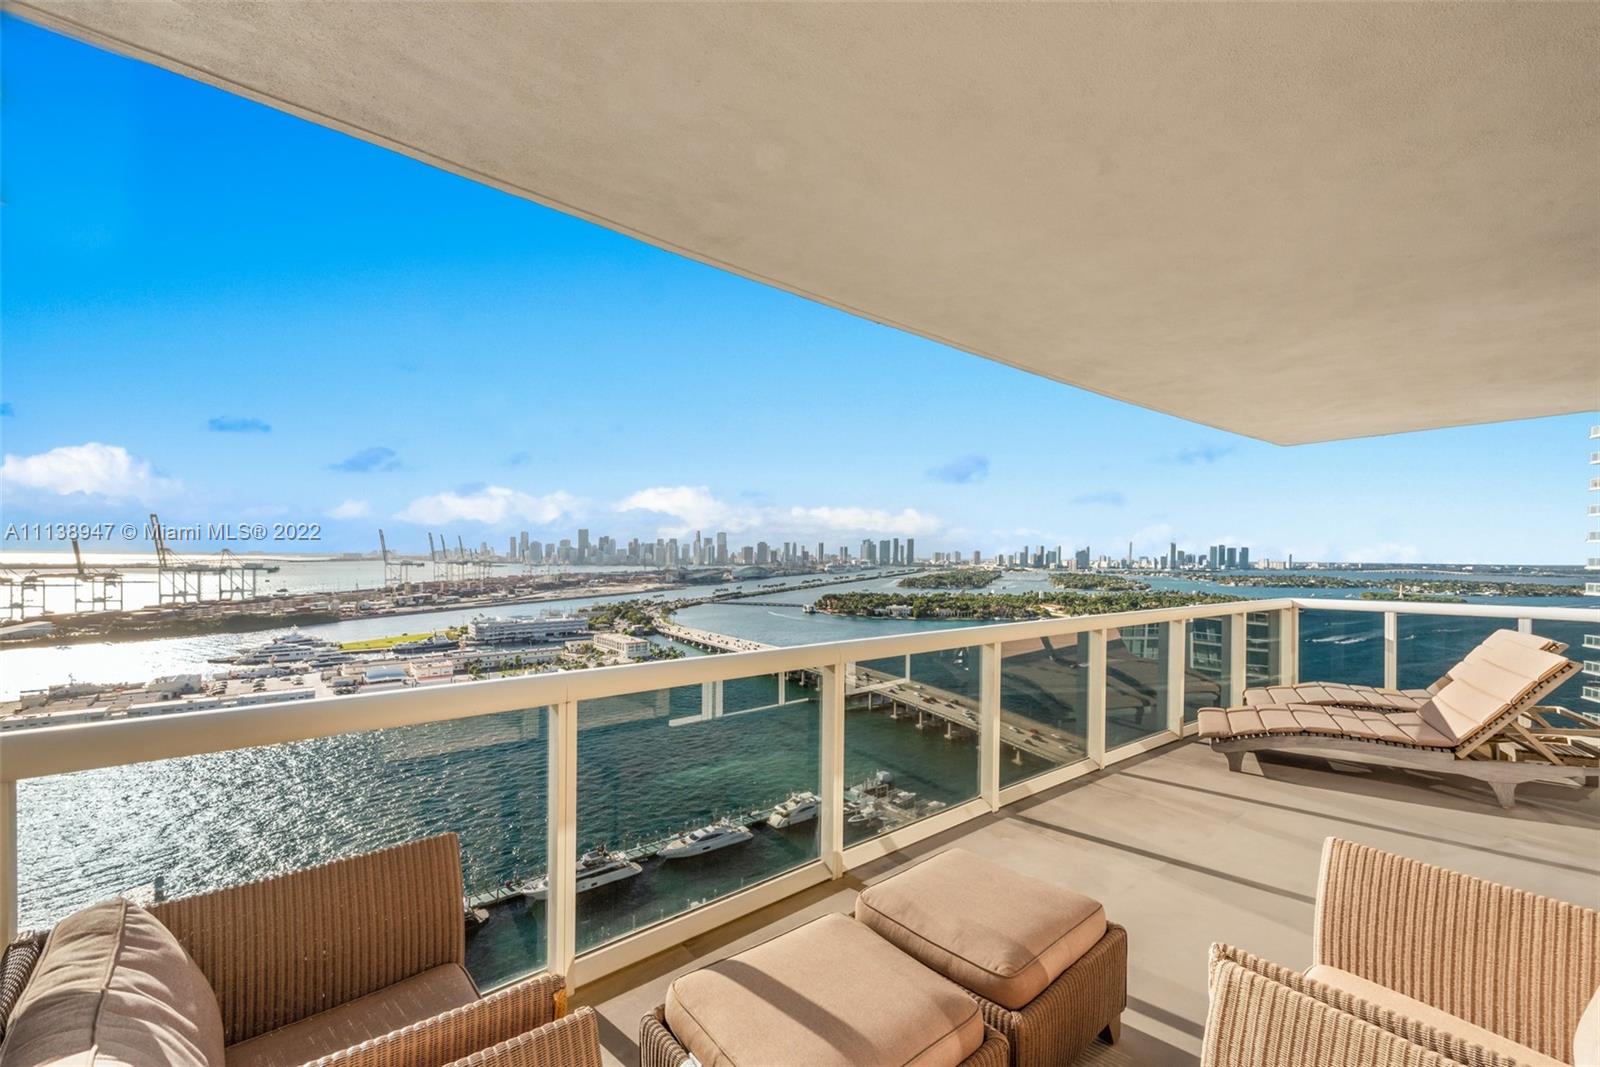 Magnificent flow-through residence with unobstructed views of the Downtown Miami skyline, Biscayne Bay & the Ocean.  Professionally designed by award winning Jeffrey Thrasher, with a beautiful oversized pivoting door that greets you from your own private elevator lobby. Featuring three terraces, custom open floorplan, media room, white porcelain floors, electric shades,
updated kitchen, custom cabinetry and designer finishes throughout.  150 cm x 150 cm "Havana" limestone floors.  All doors and hardware are custom made, with all bathrooms completely re-designed.   Murano Grande is a South of Fifth Neighborhood luxury building with recently restored & updated pool deck + on-site restaurant, tennis, gym, 24 hour security, valet and concierge.